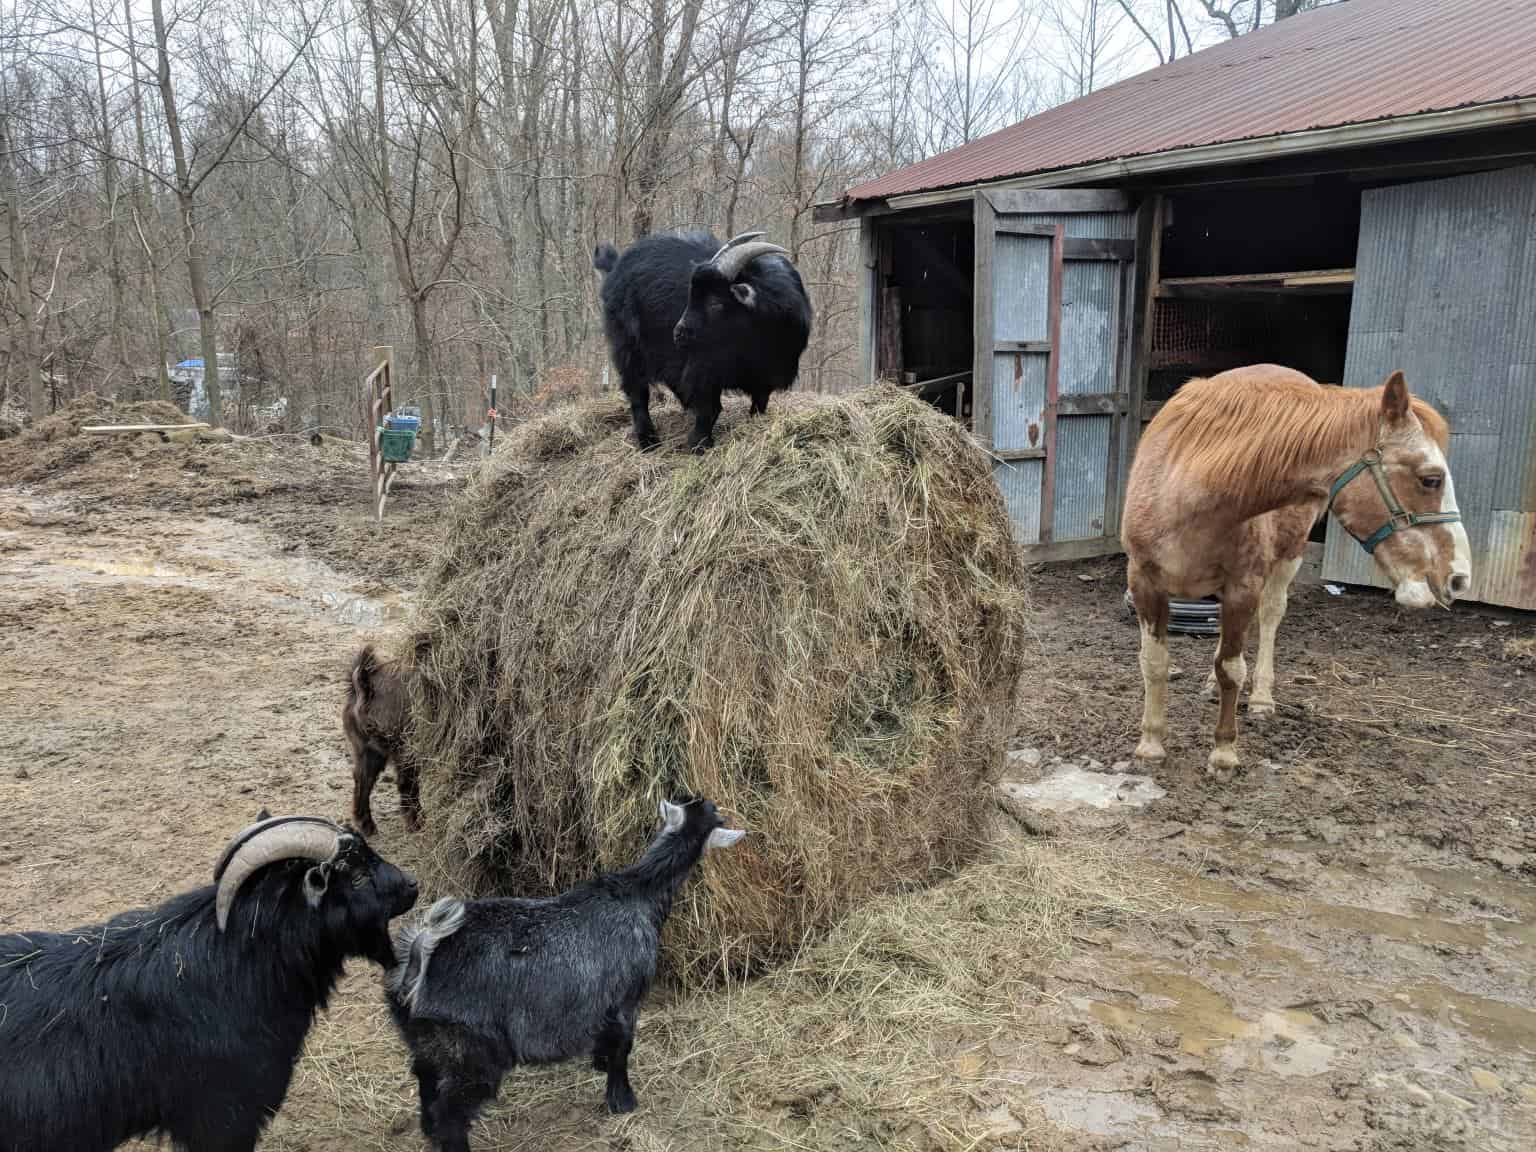 pygmy goats eating hay next to horse